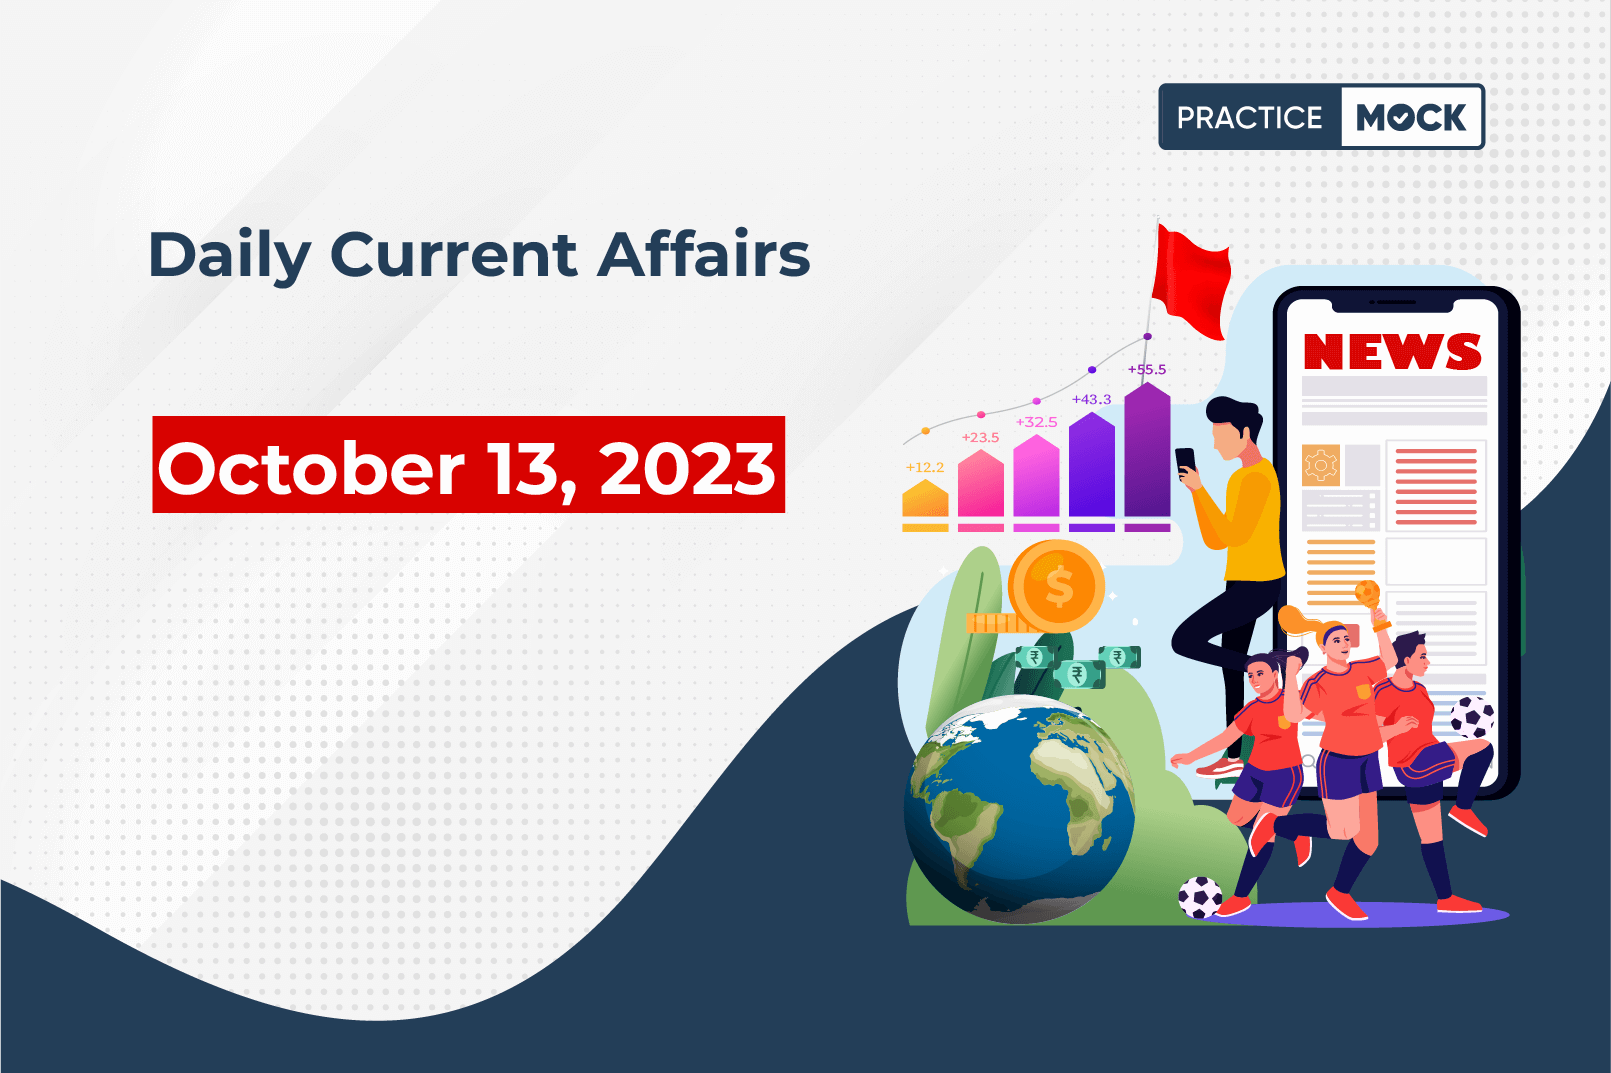 Daily Current Affairs- October 13, 2023 (1)